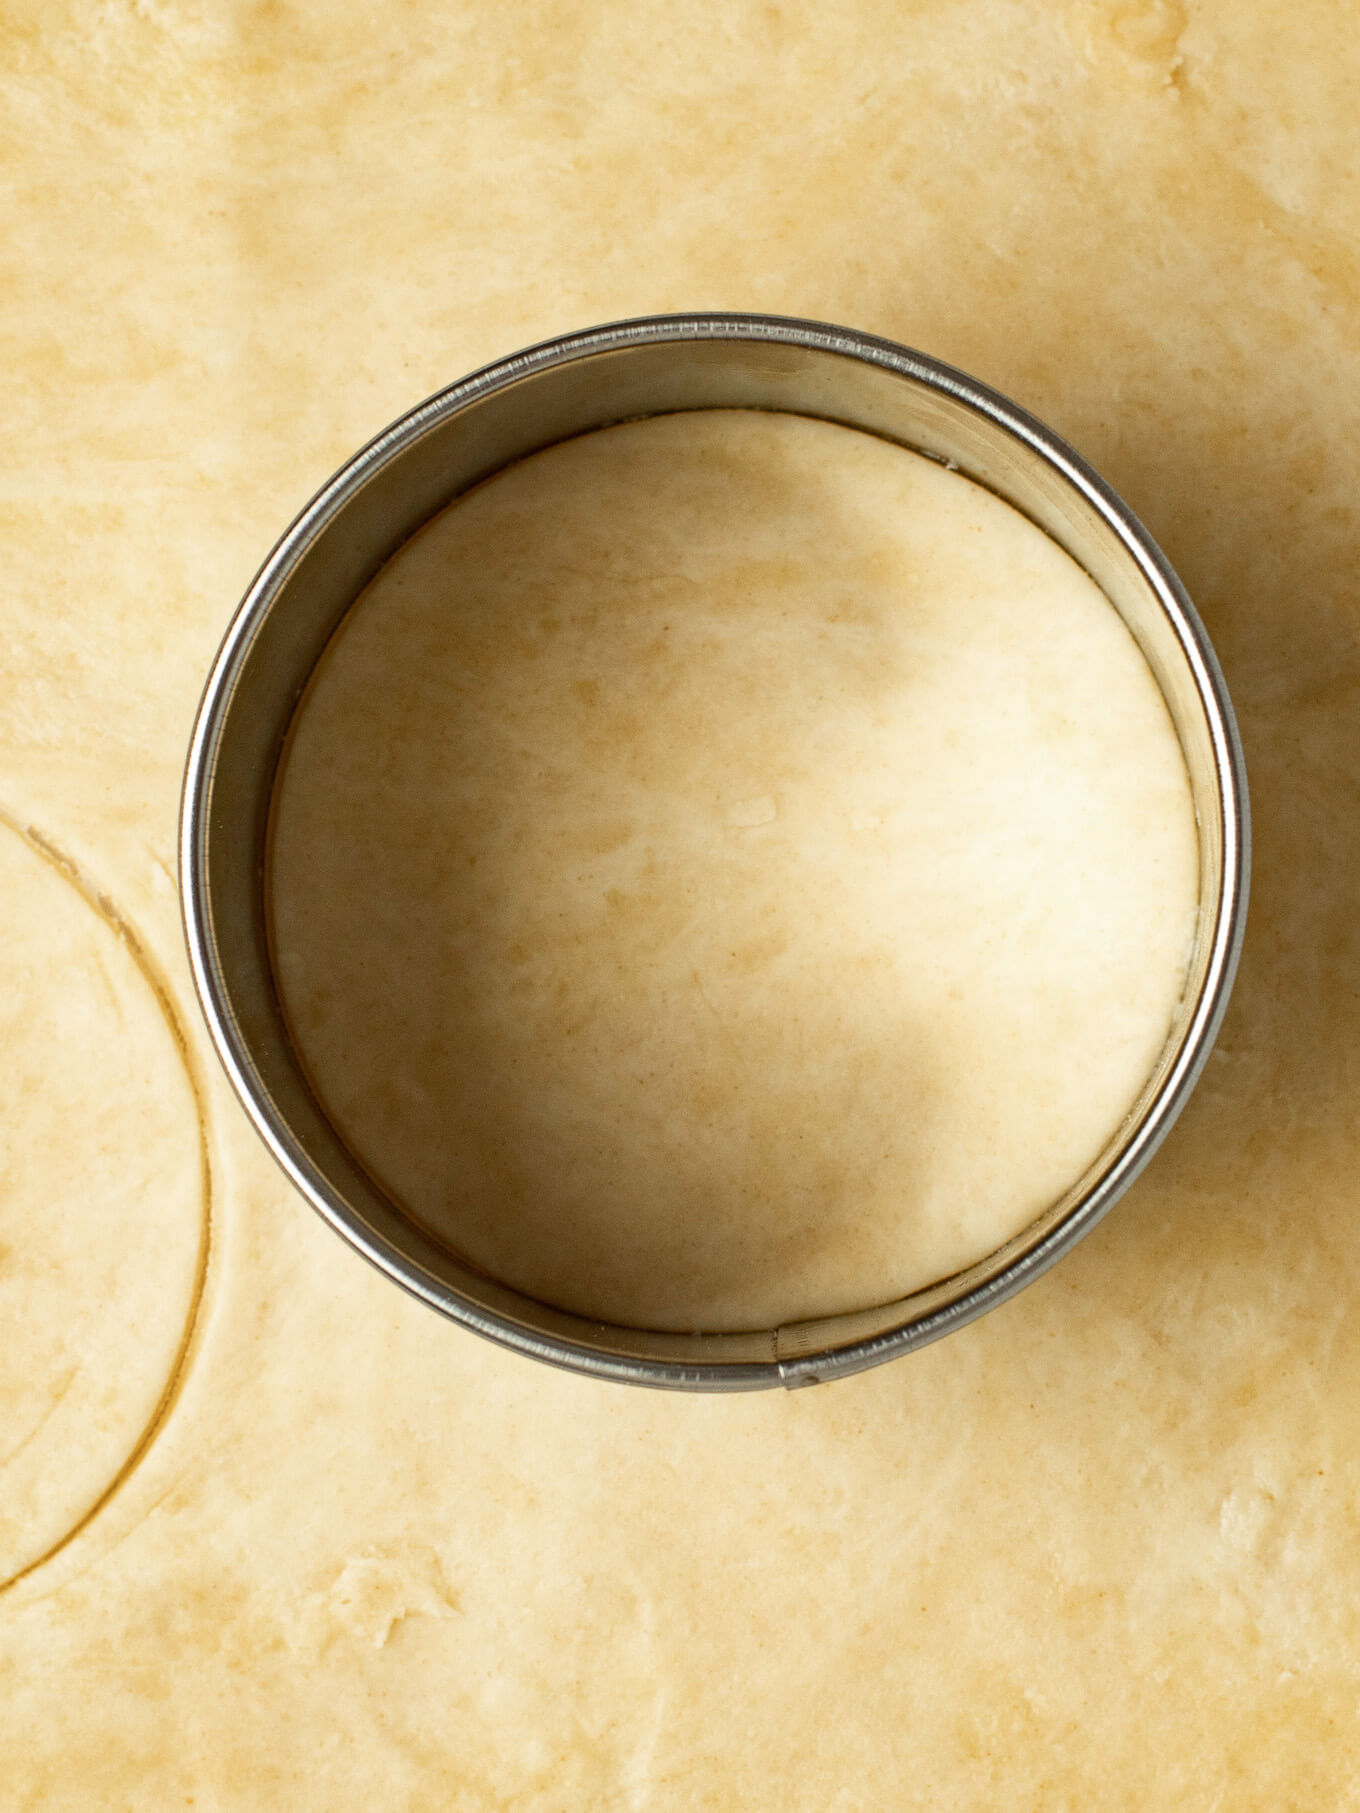 An overhead view of a pie crust that's been rolled out. A circular cookie cutter is cutting out a piece of the crust.